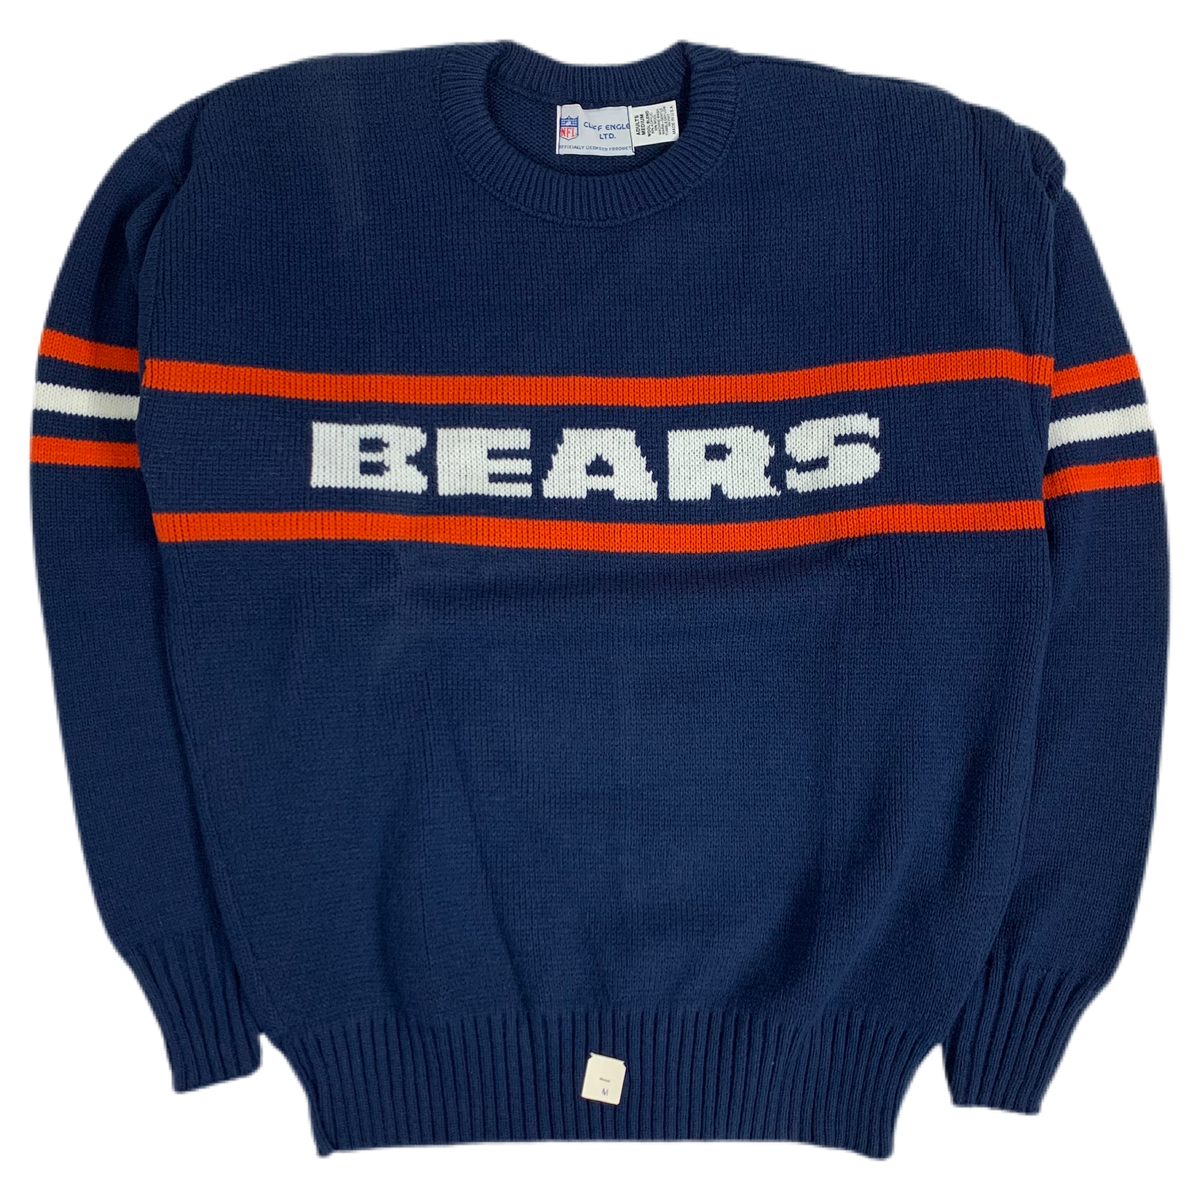 Vintage Chicago Bears “Cliff Engle” Knit Sweater